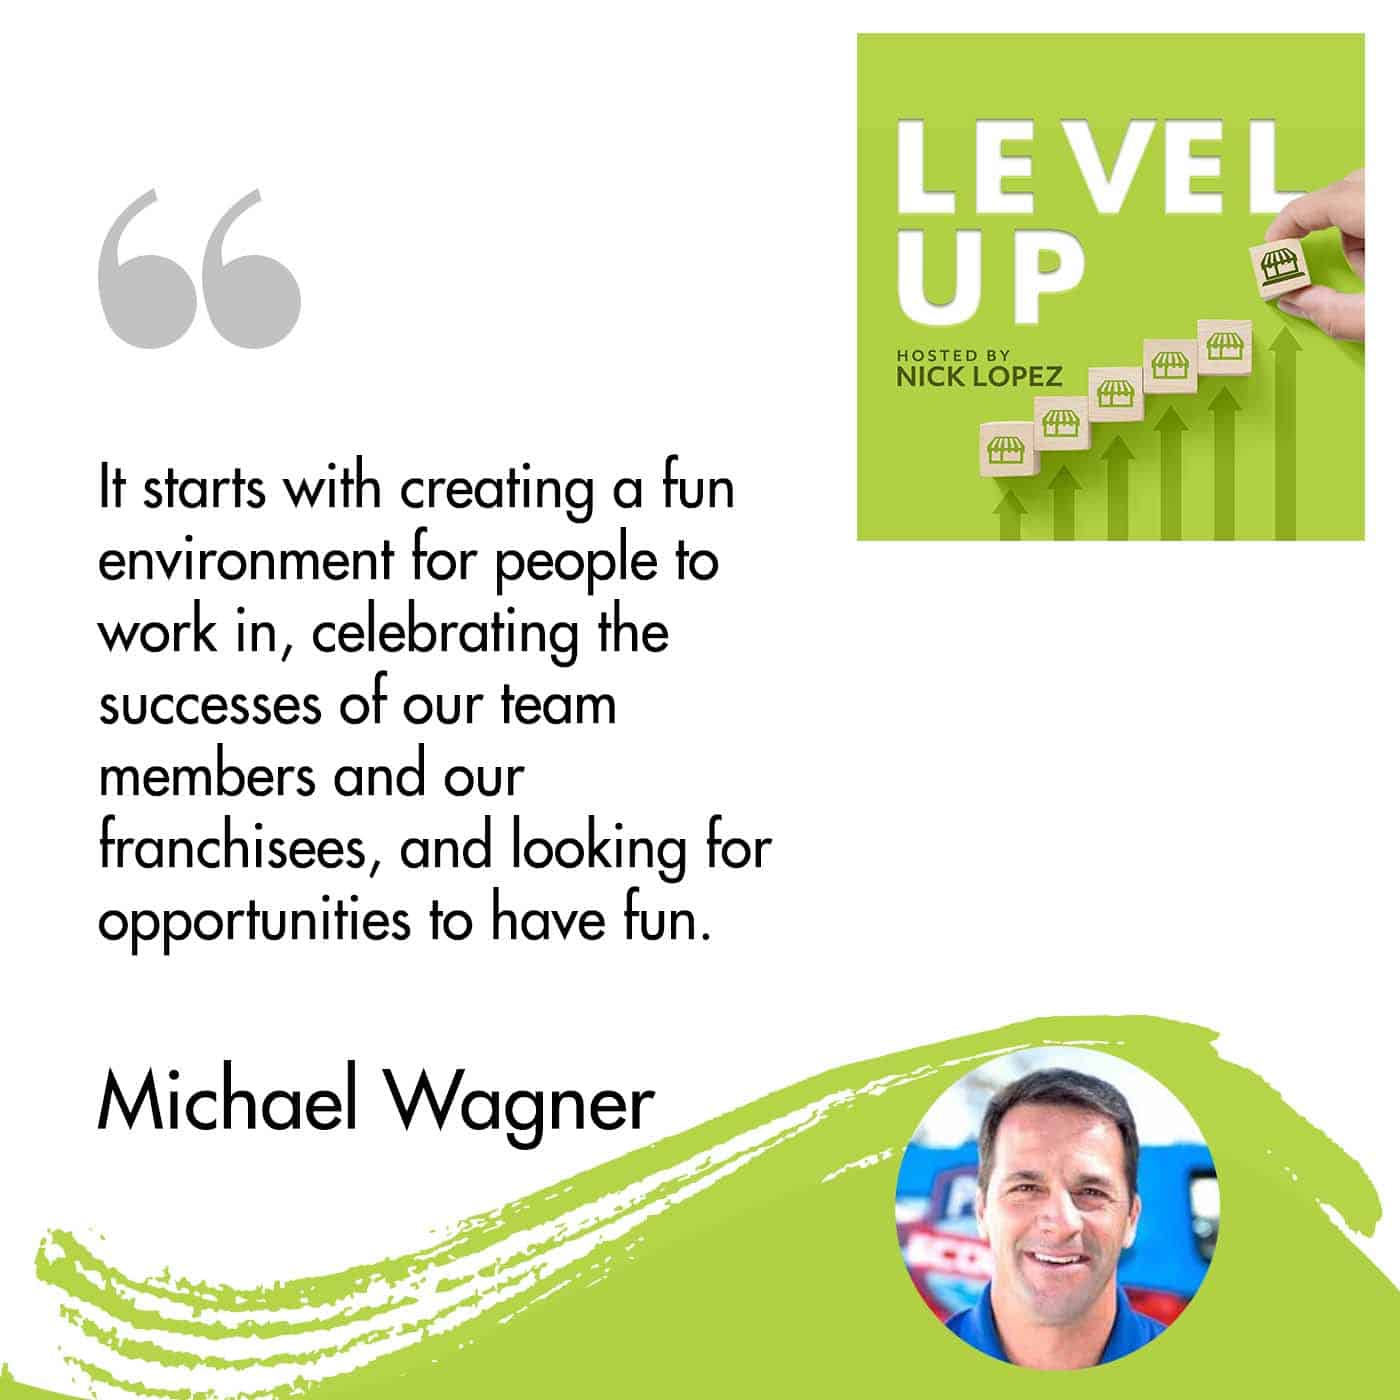 Level Up with Nick Lopez | Michael Wagner | Franchising Model